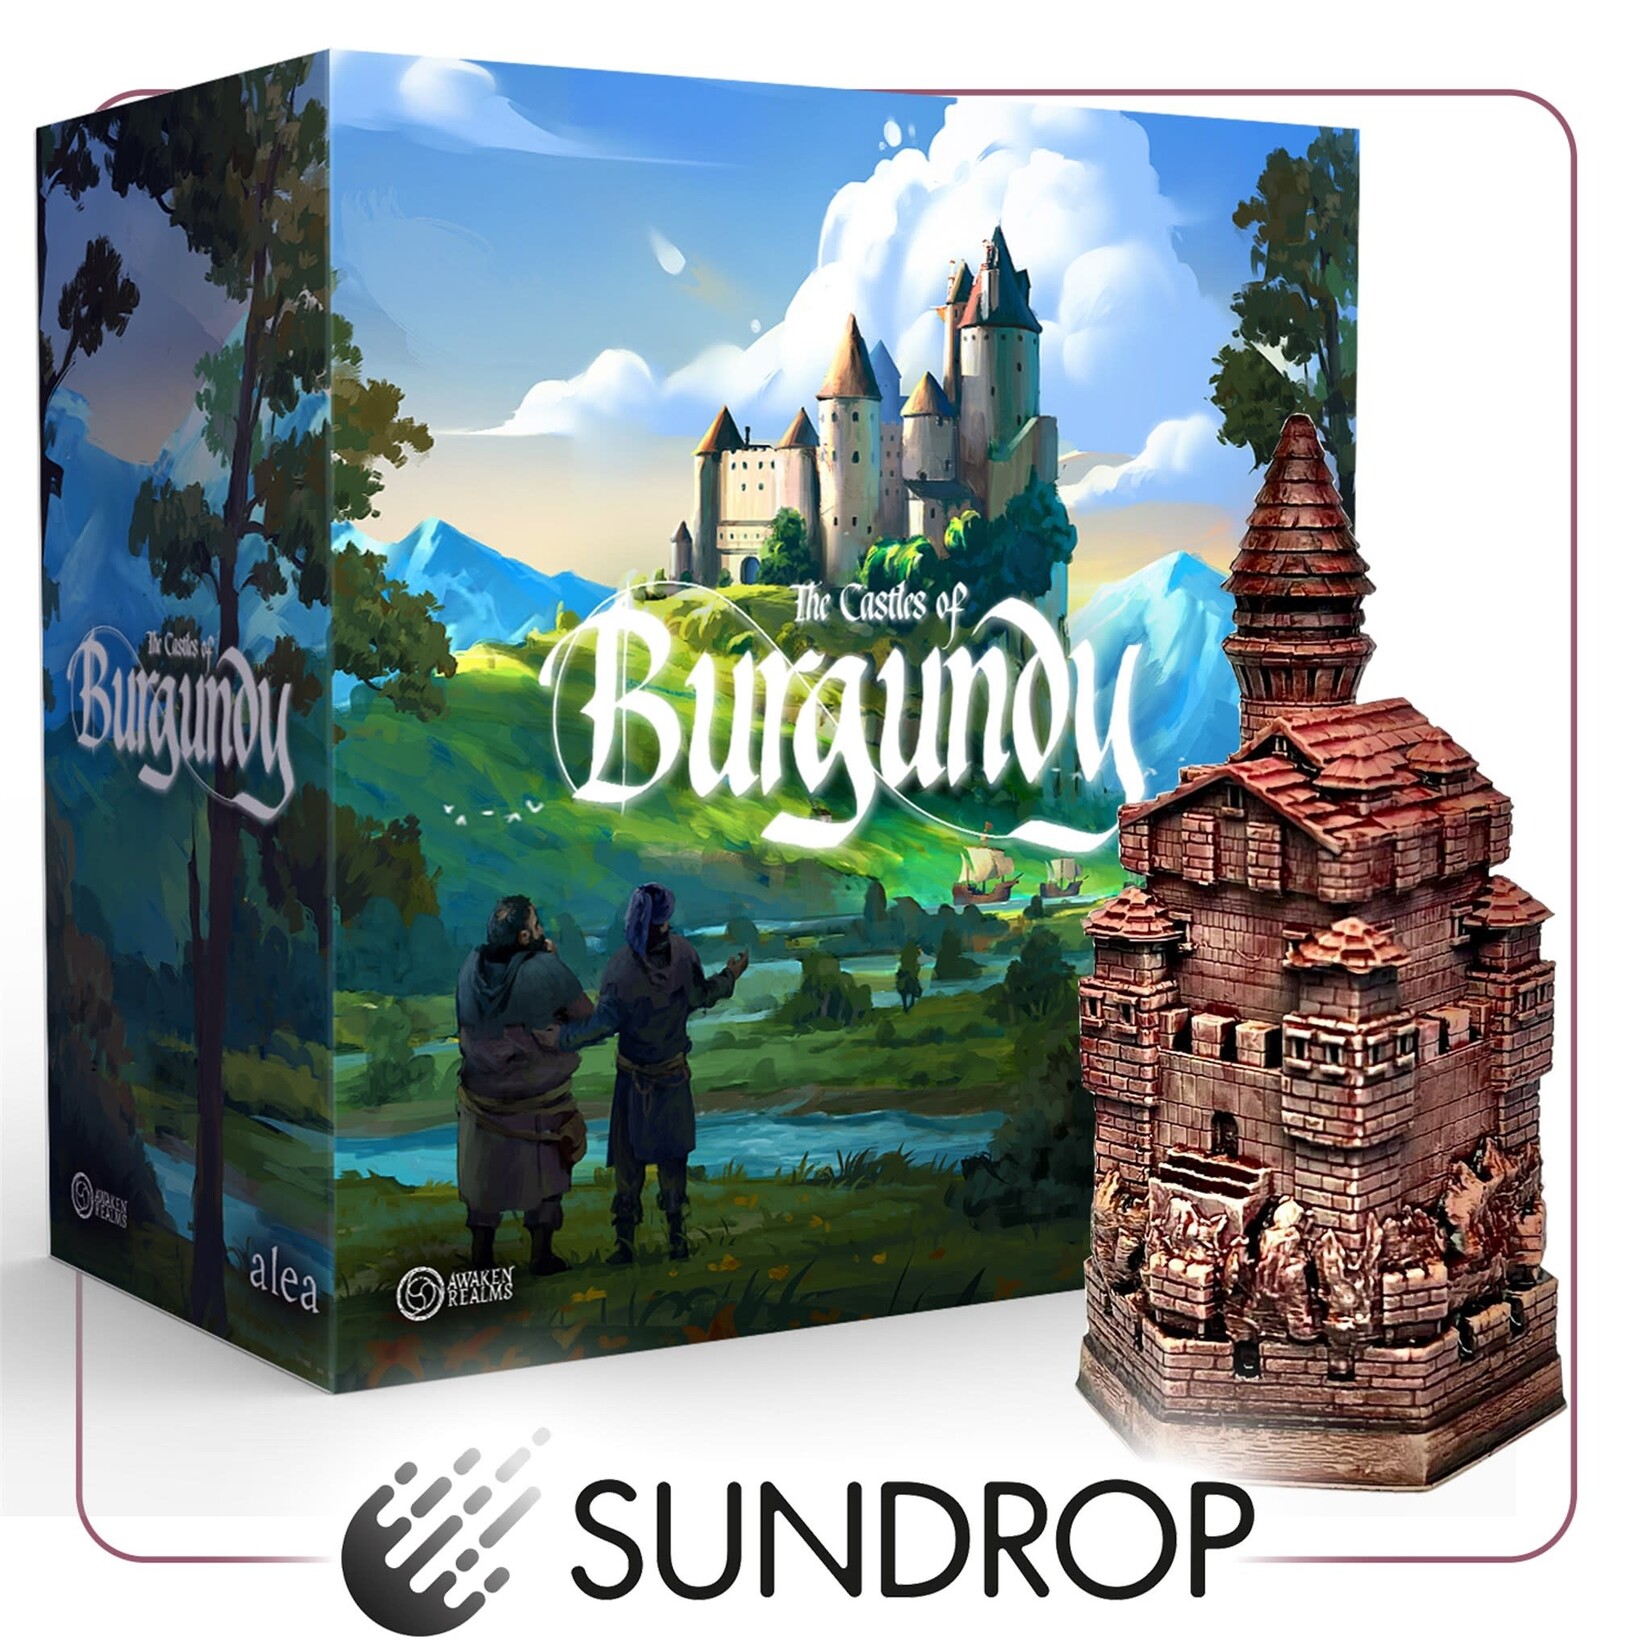 Castles of Burgundy Special Edition (Sundrop) (Damaged Box, Otherwise New/All Sales Final) Dragon Cache Game